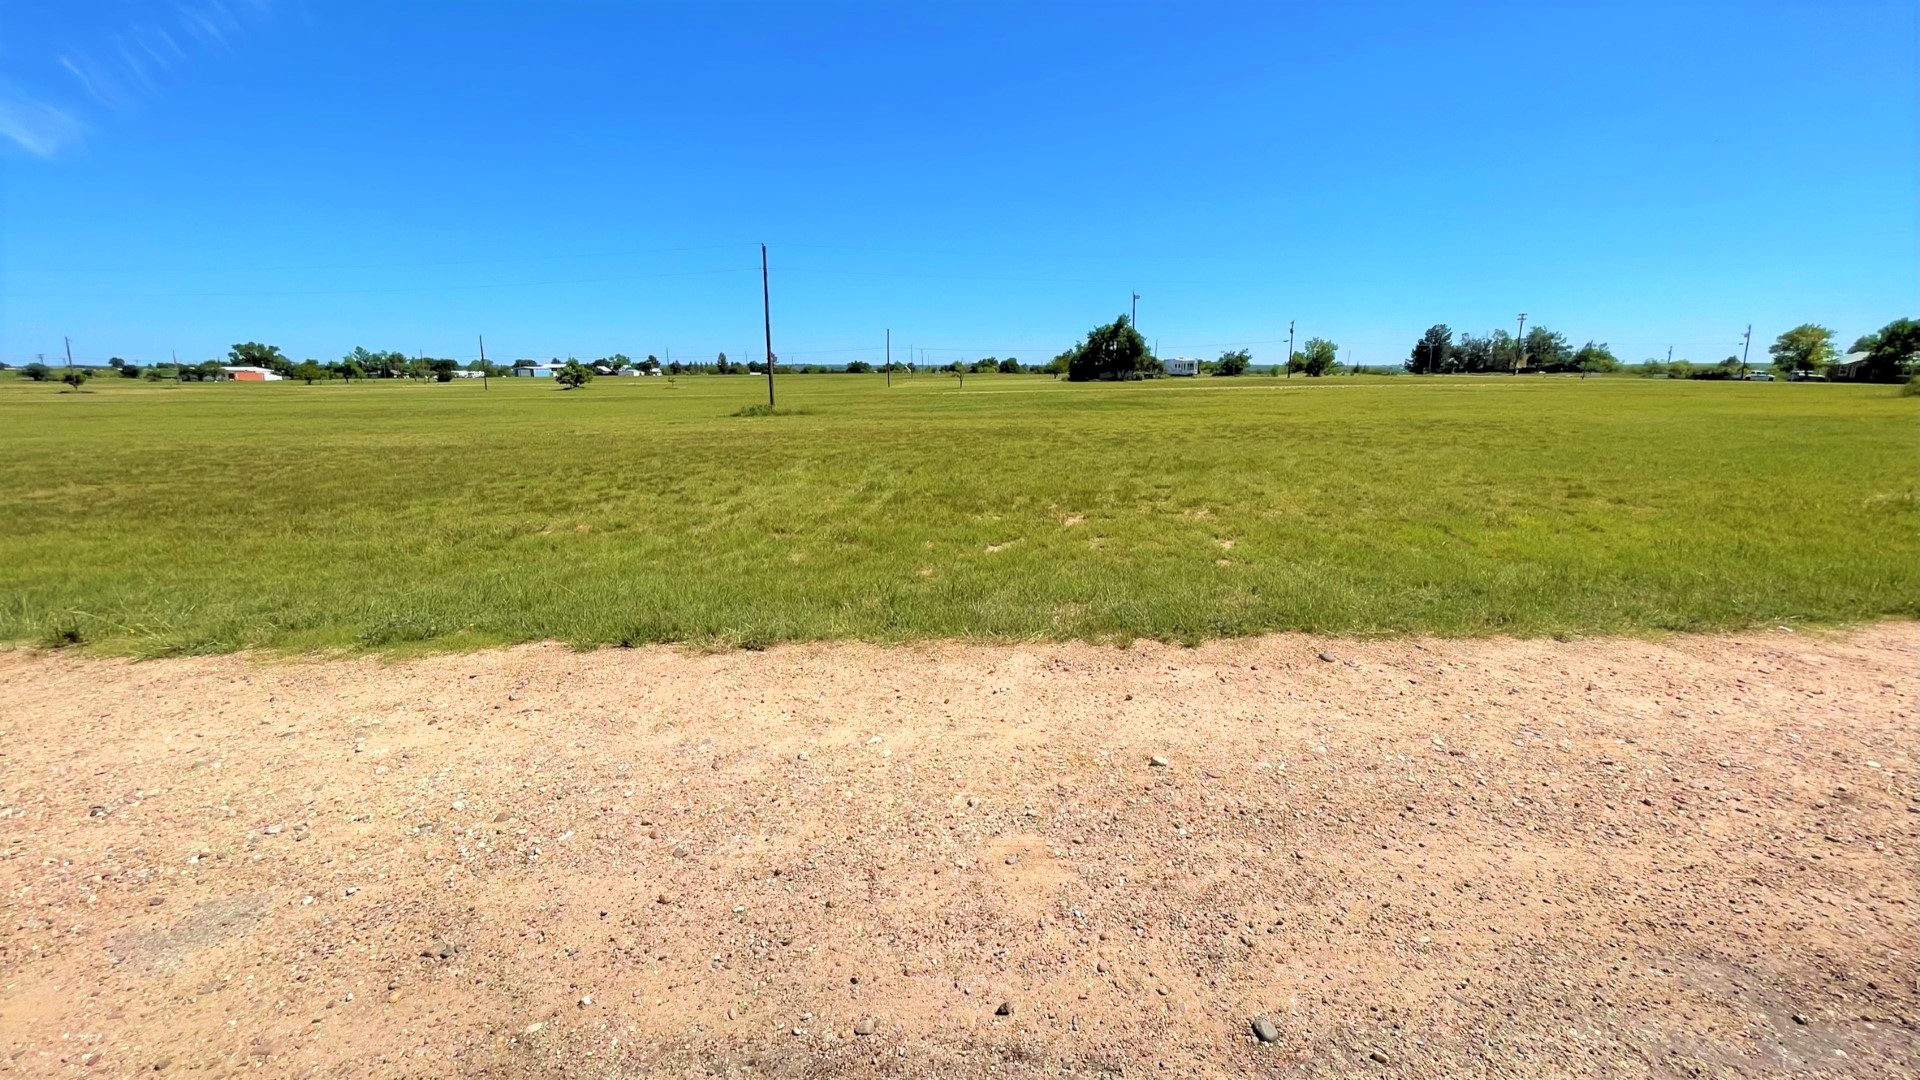 Land for Sale in Donley County 0.11 Acre CLEARED Lot with Utilities near Amarillo TX